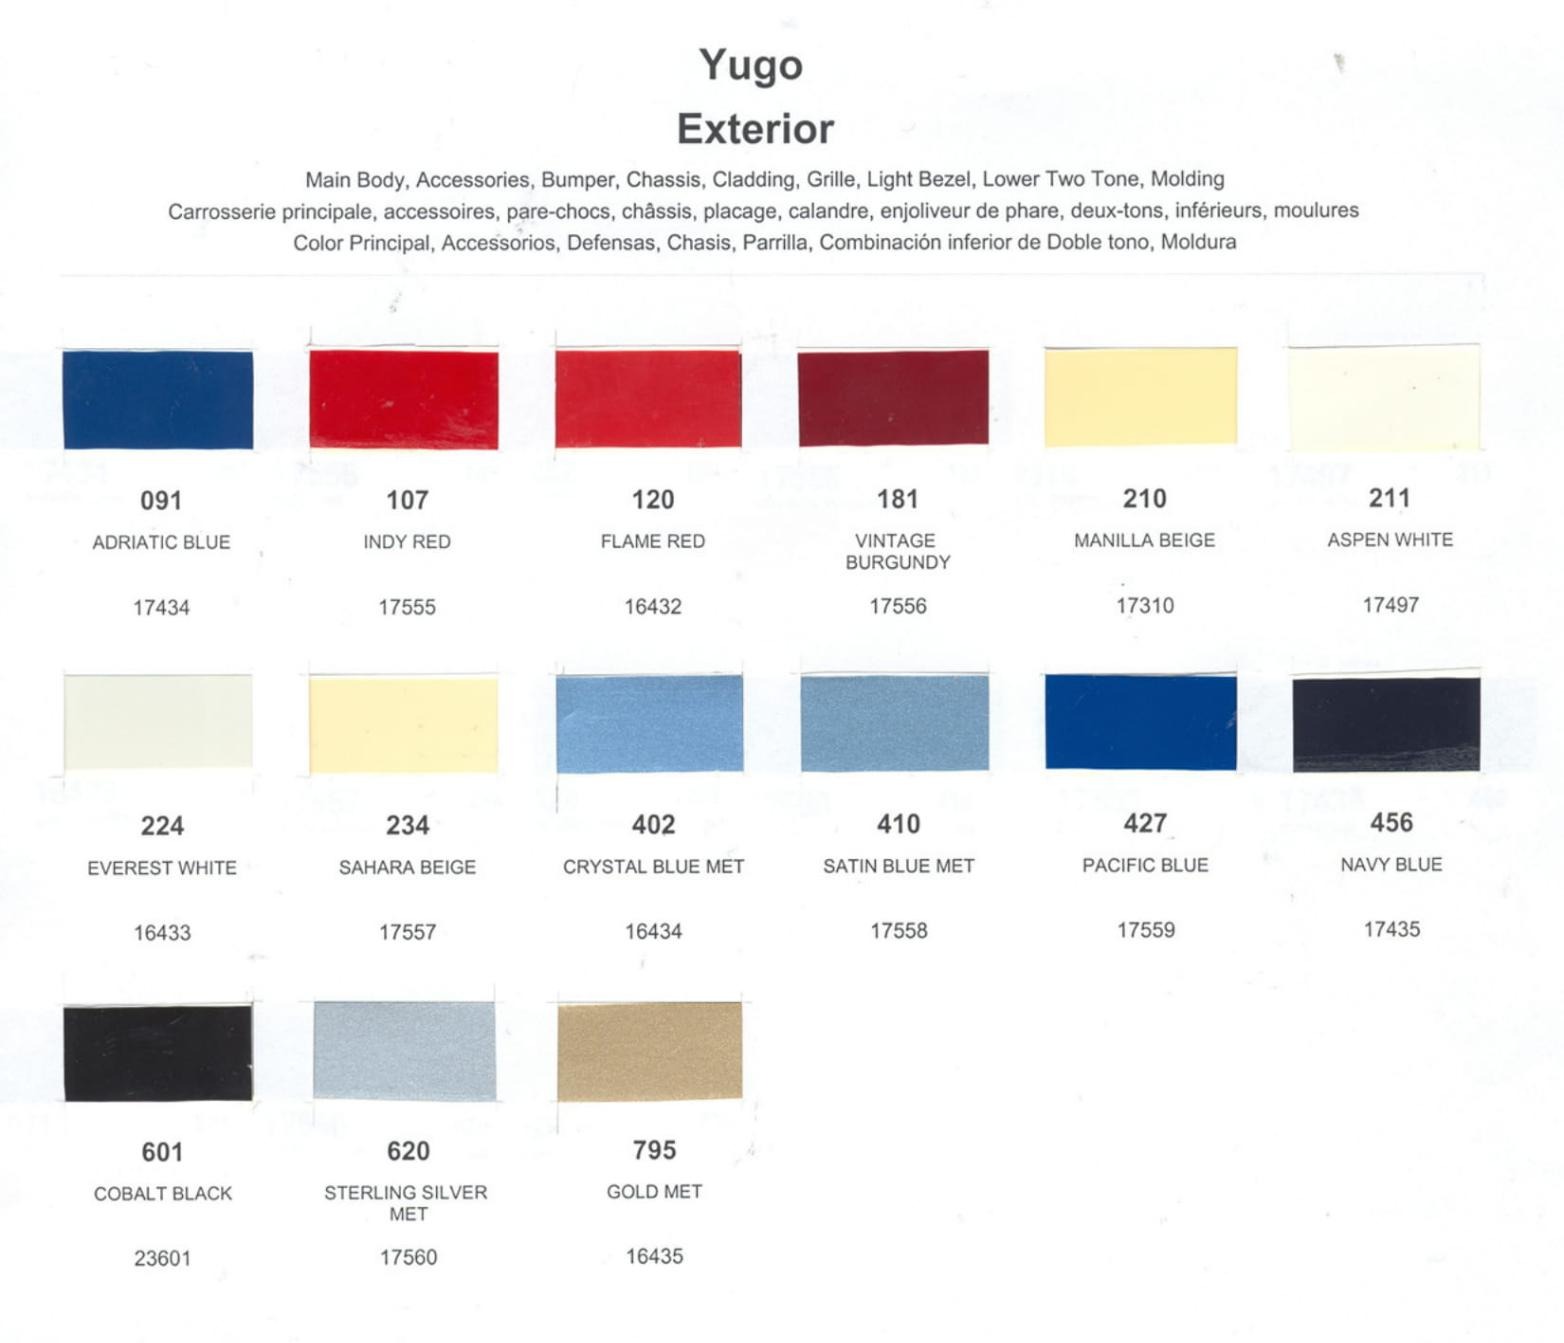 Exterior Colors and their paint codes used on Yugo in 1989